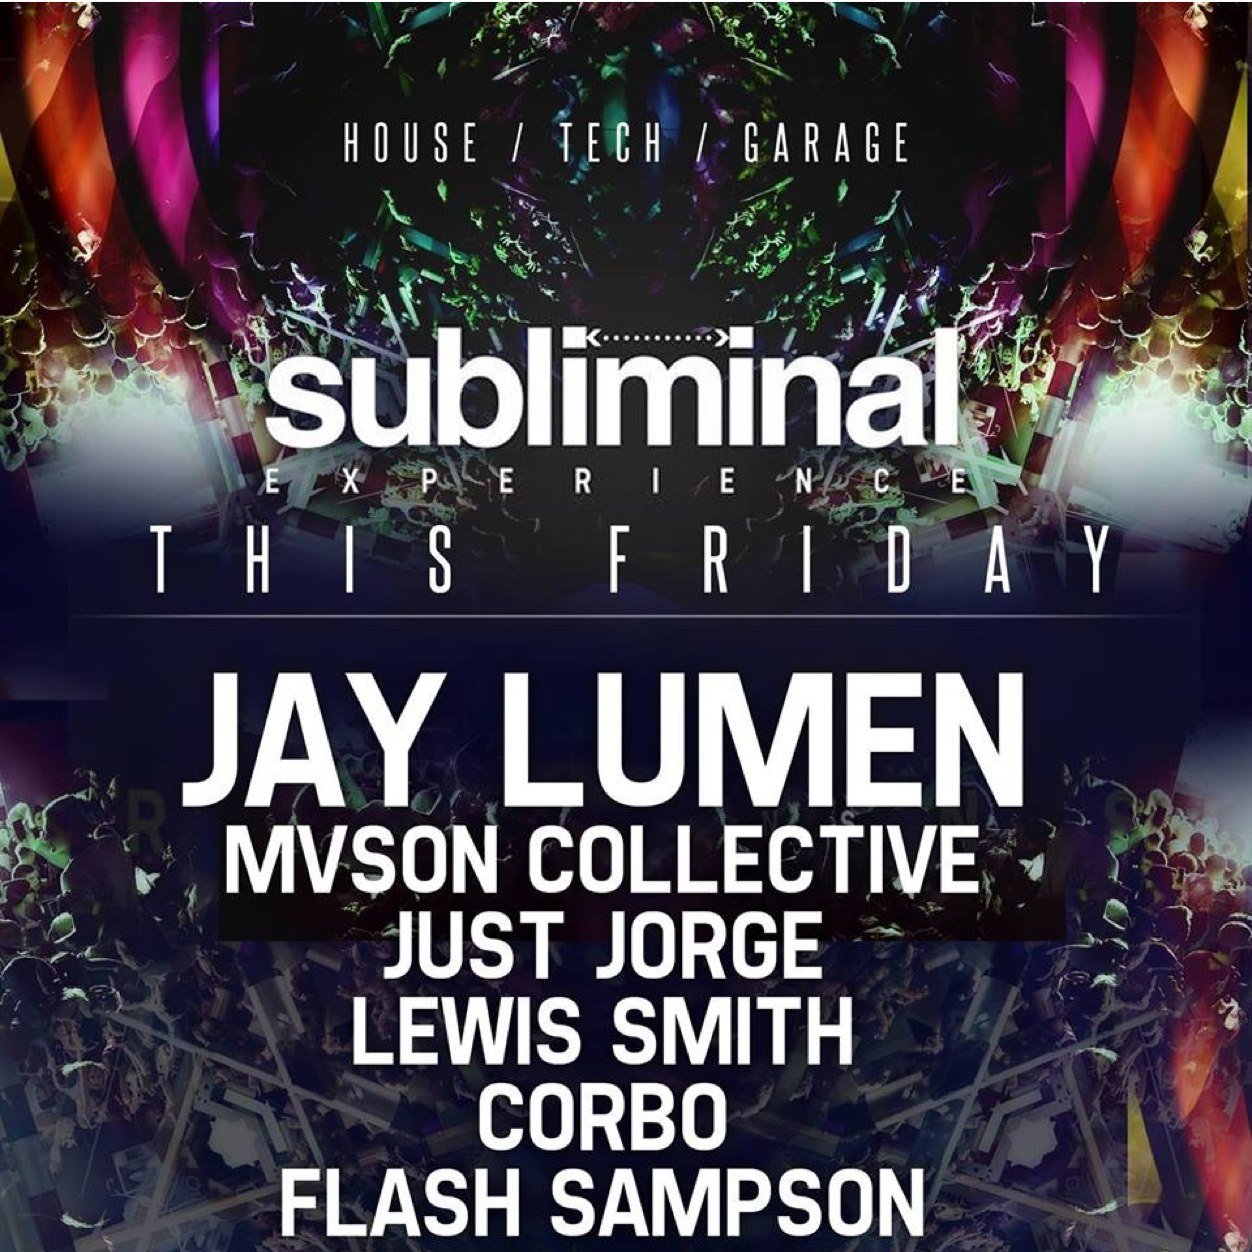 Experience something different.. Subliminal Events. Future Garage, Ambient/Deep/Tech House

 **NEXT EVENT - JAY LUMEN - 7th NOVEMBER - @ Venus nightclub**